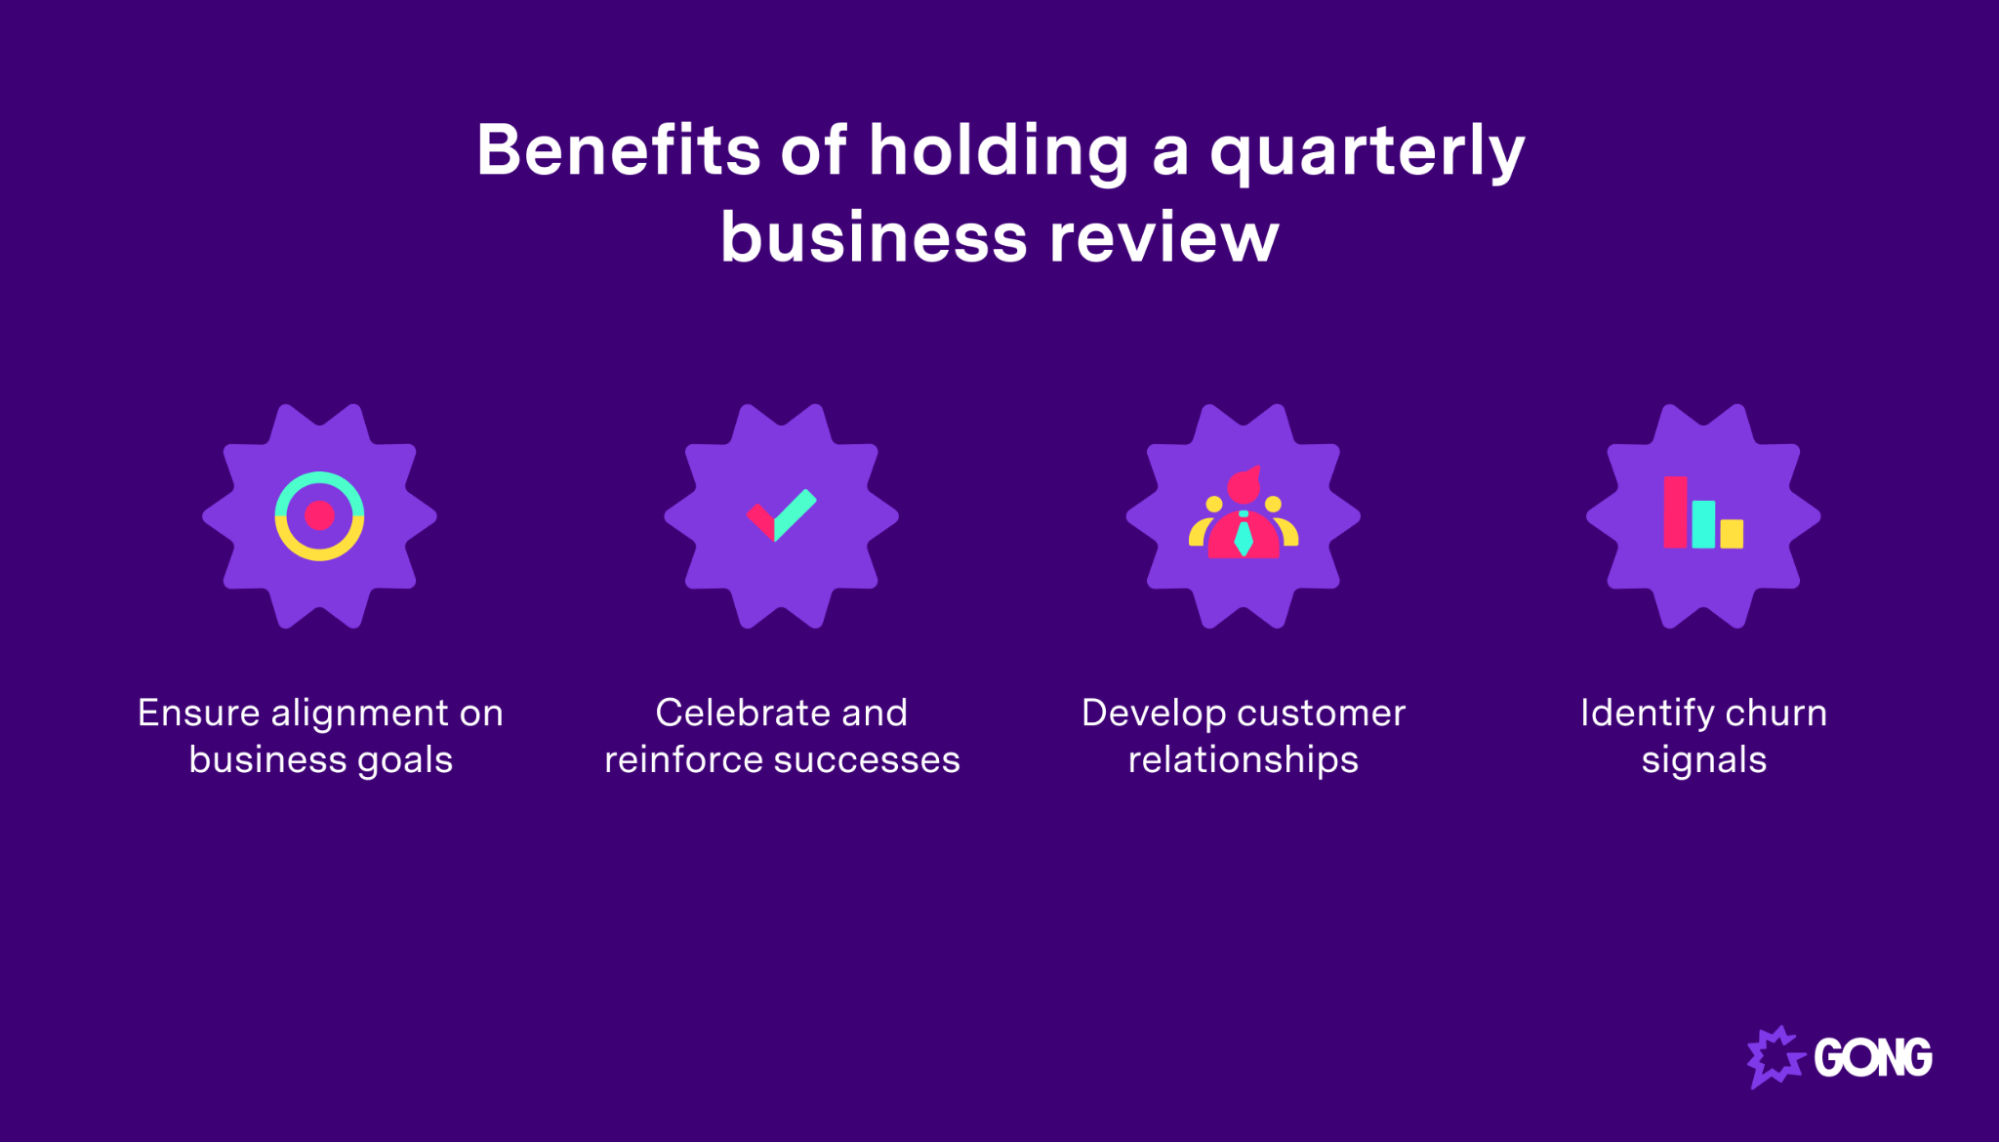 Benefits of holding a quarterly business review